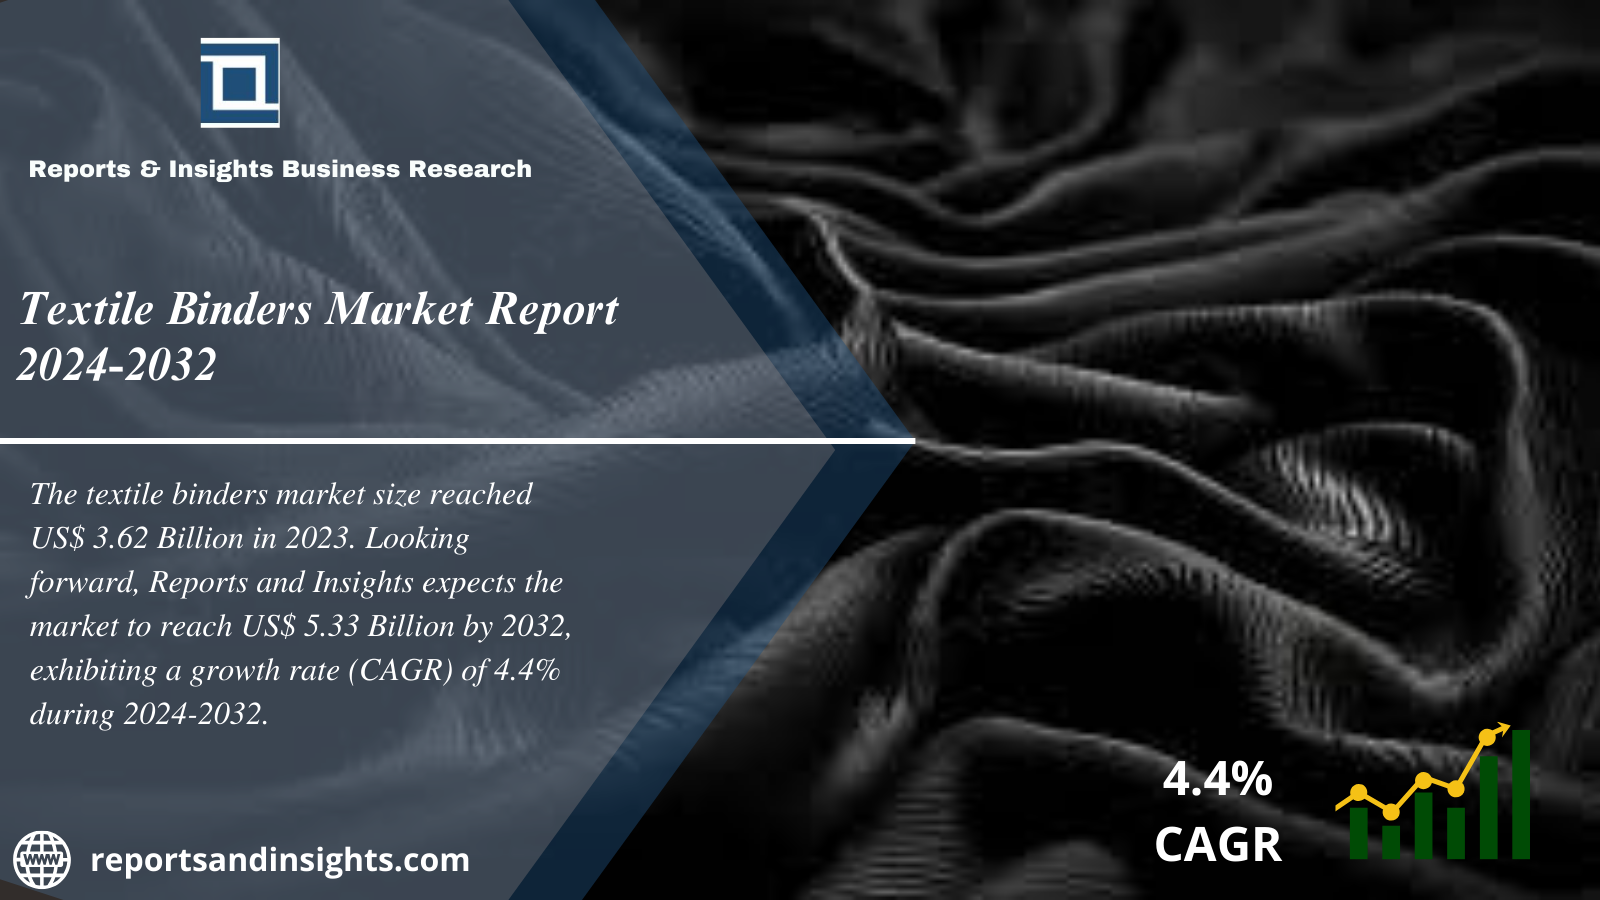 Textile Binders Market 2024 to 2032: Growth, Share, Size, Trends, Analysis and Research Report